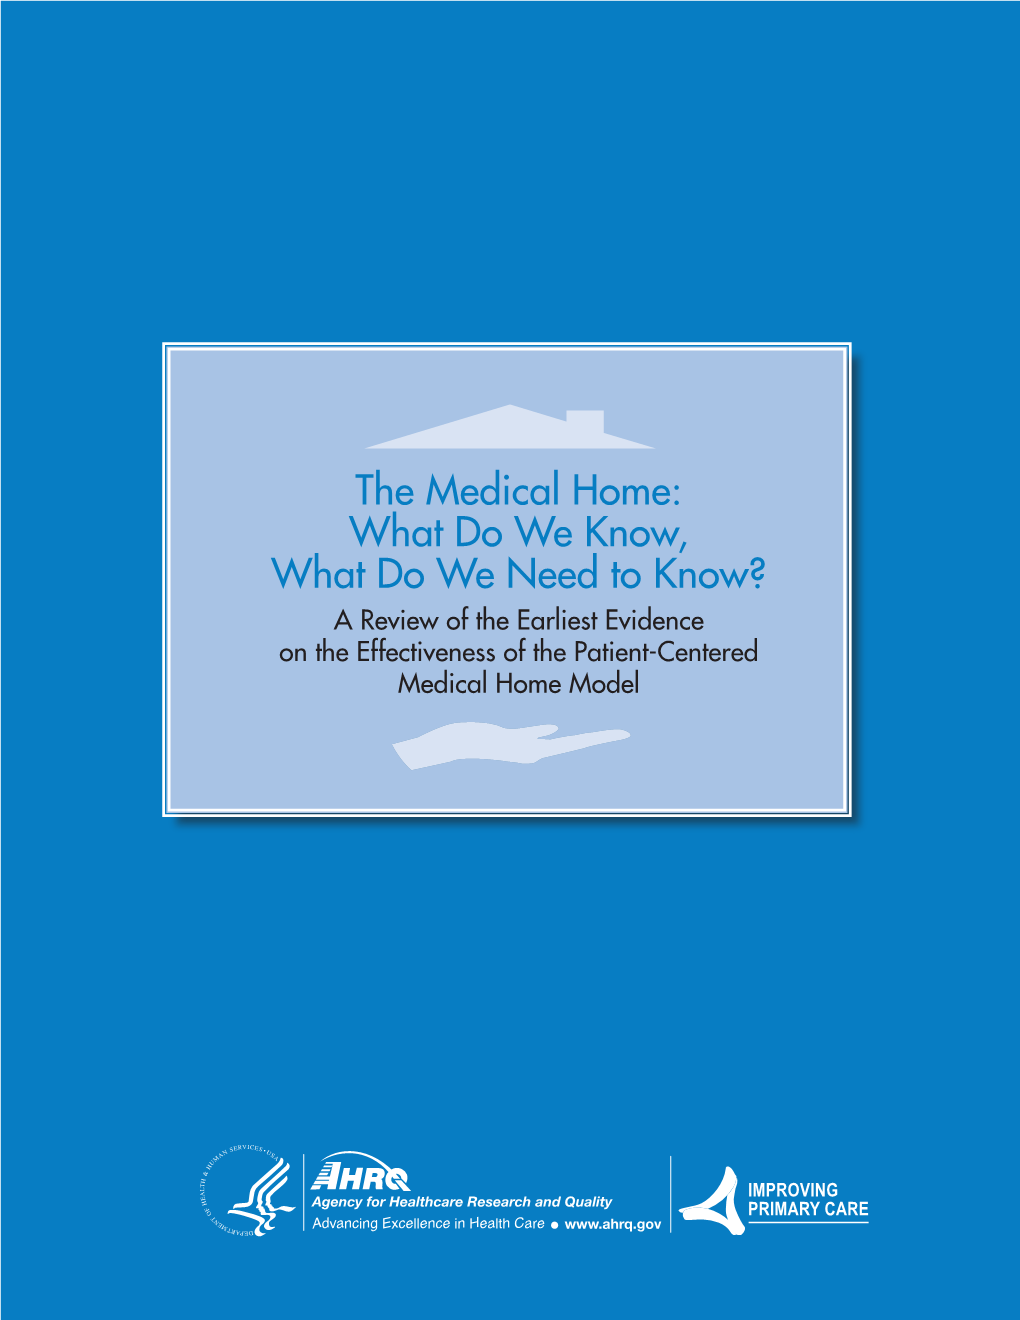 The Medical Home: What Do We Know, What Do We Need to Know? a Review of the Earliest Evidence on the Effectiveness of the Patient-Centered Medical Home Model